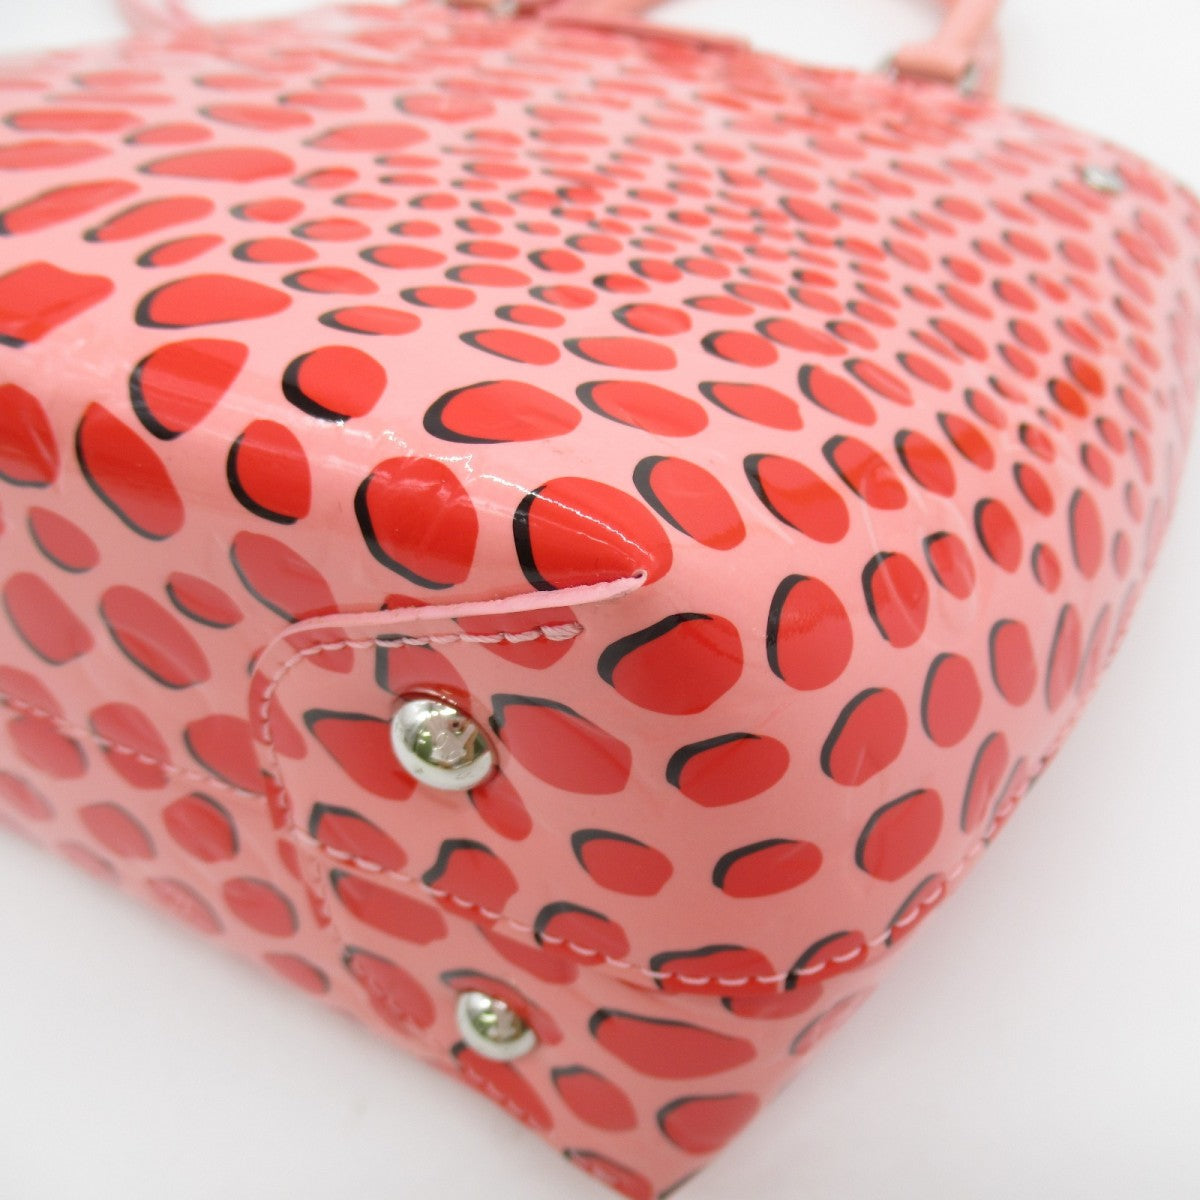 Louis Vuitton Limited Edition Alma BB Jungle Palm Dots in Sugar Pink &  Poppy Vernis - SOLD